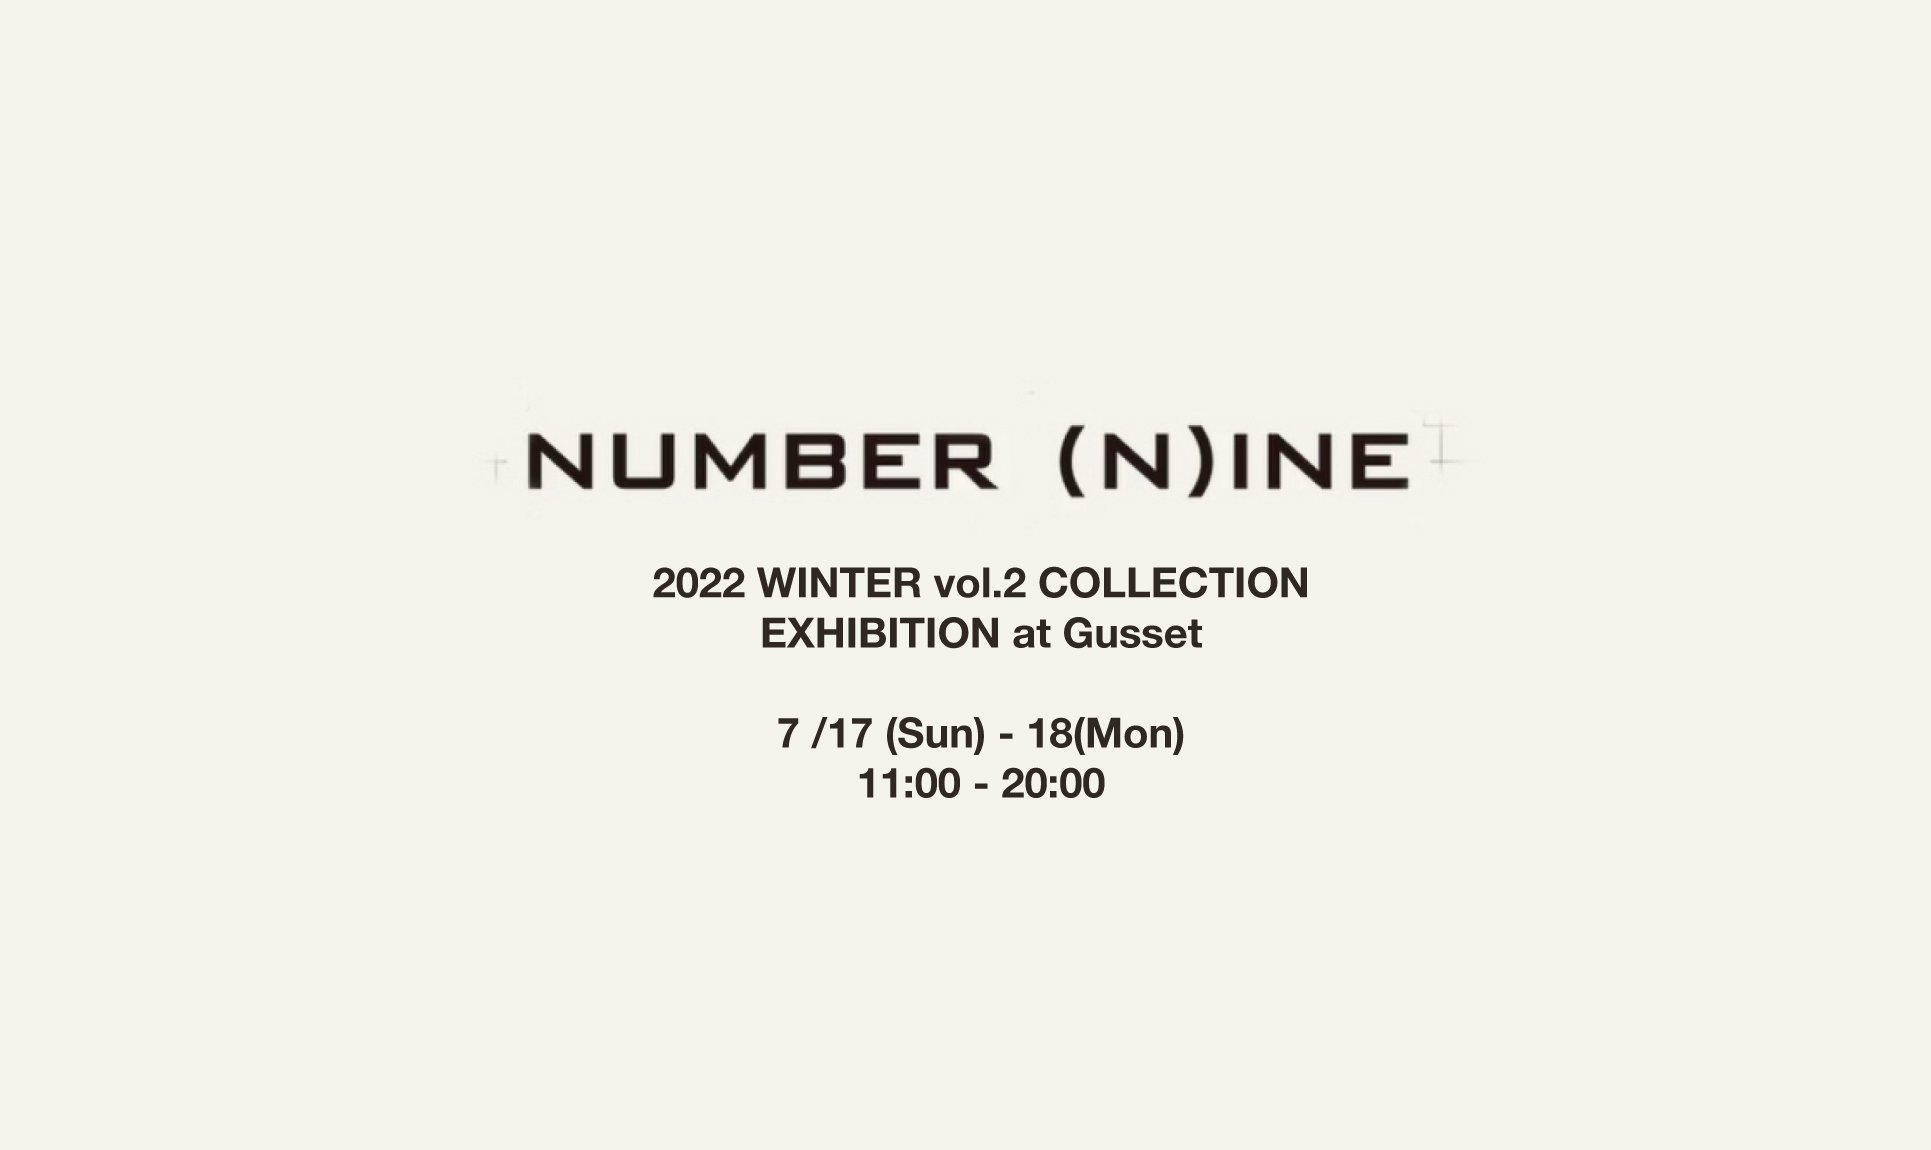 NUMBER (N)INE / 2022 WINTER vol.2 COLLECTION - Gusset 展示会